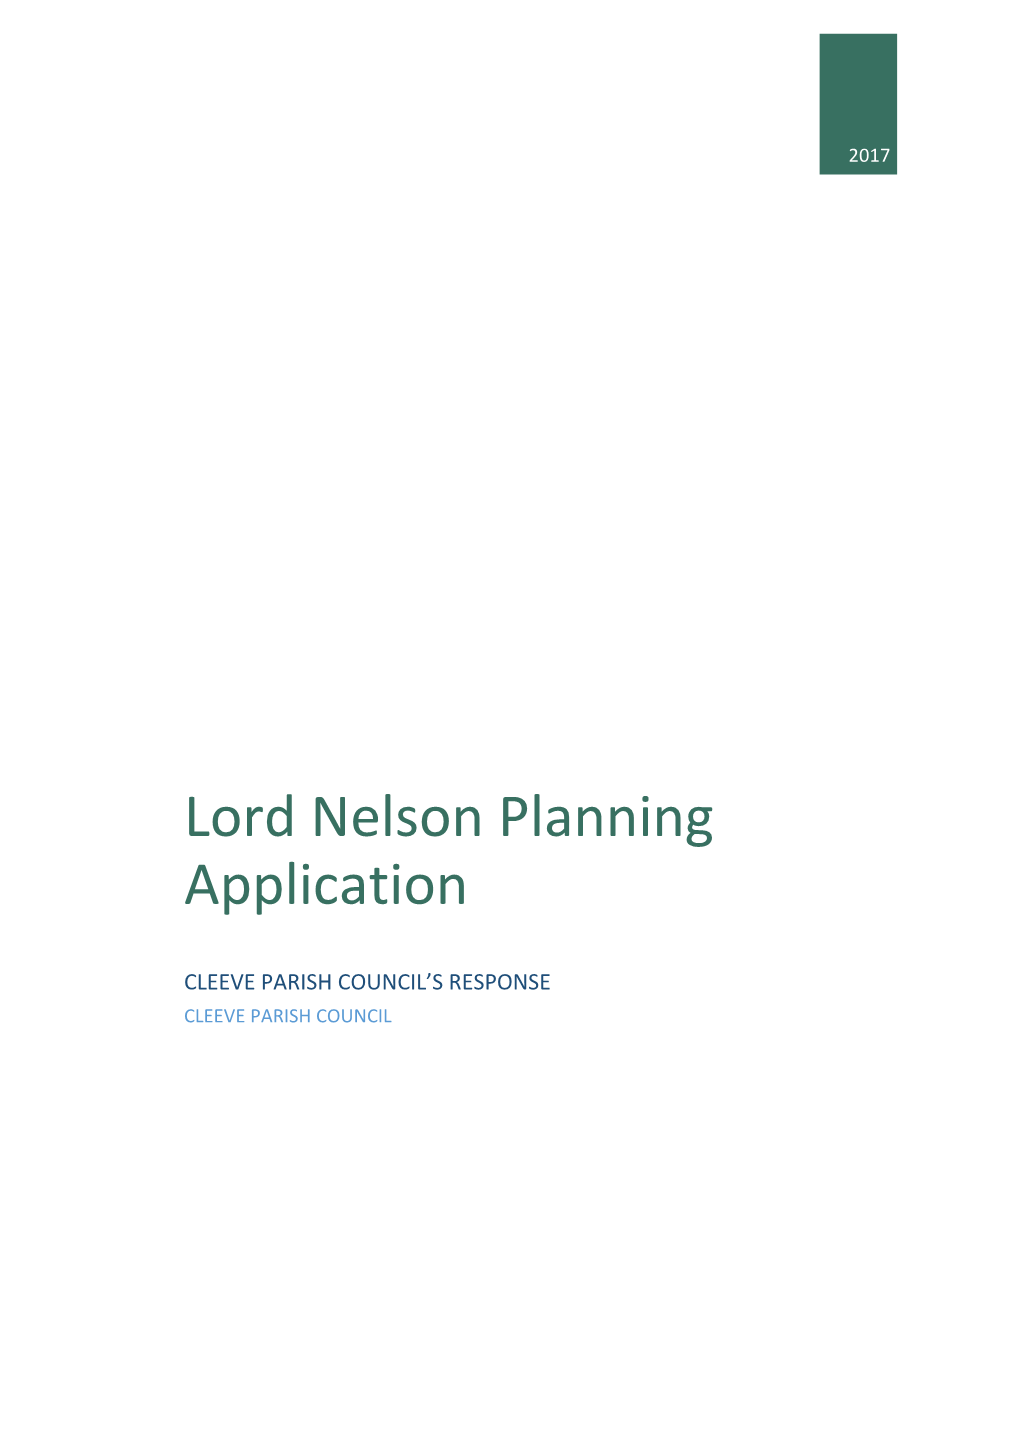 Lord Nelson Planning Application